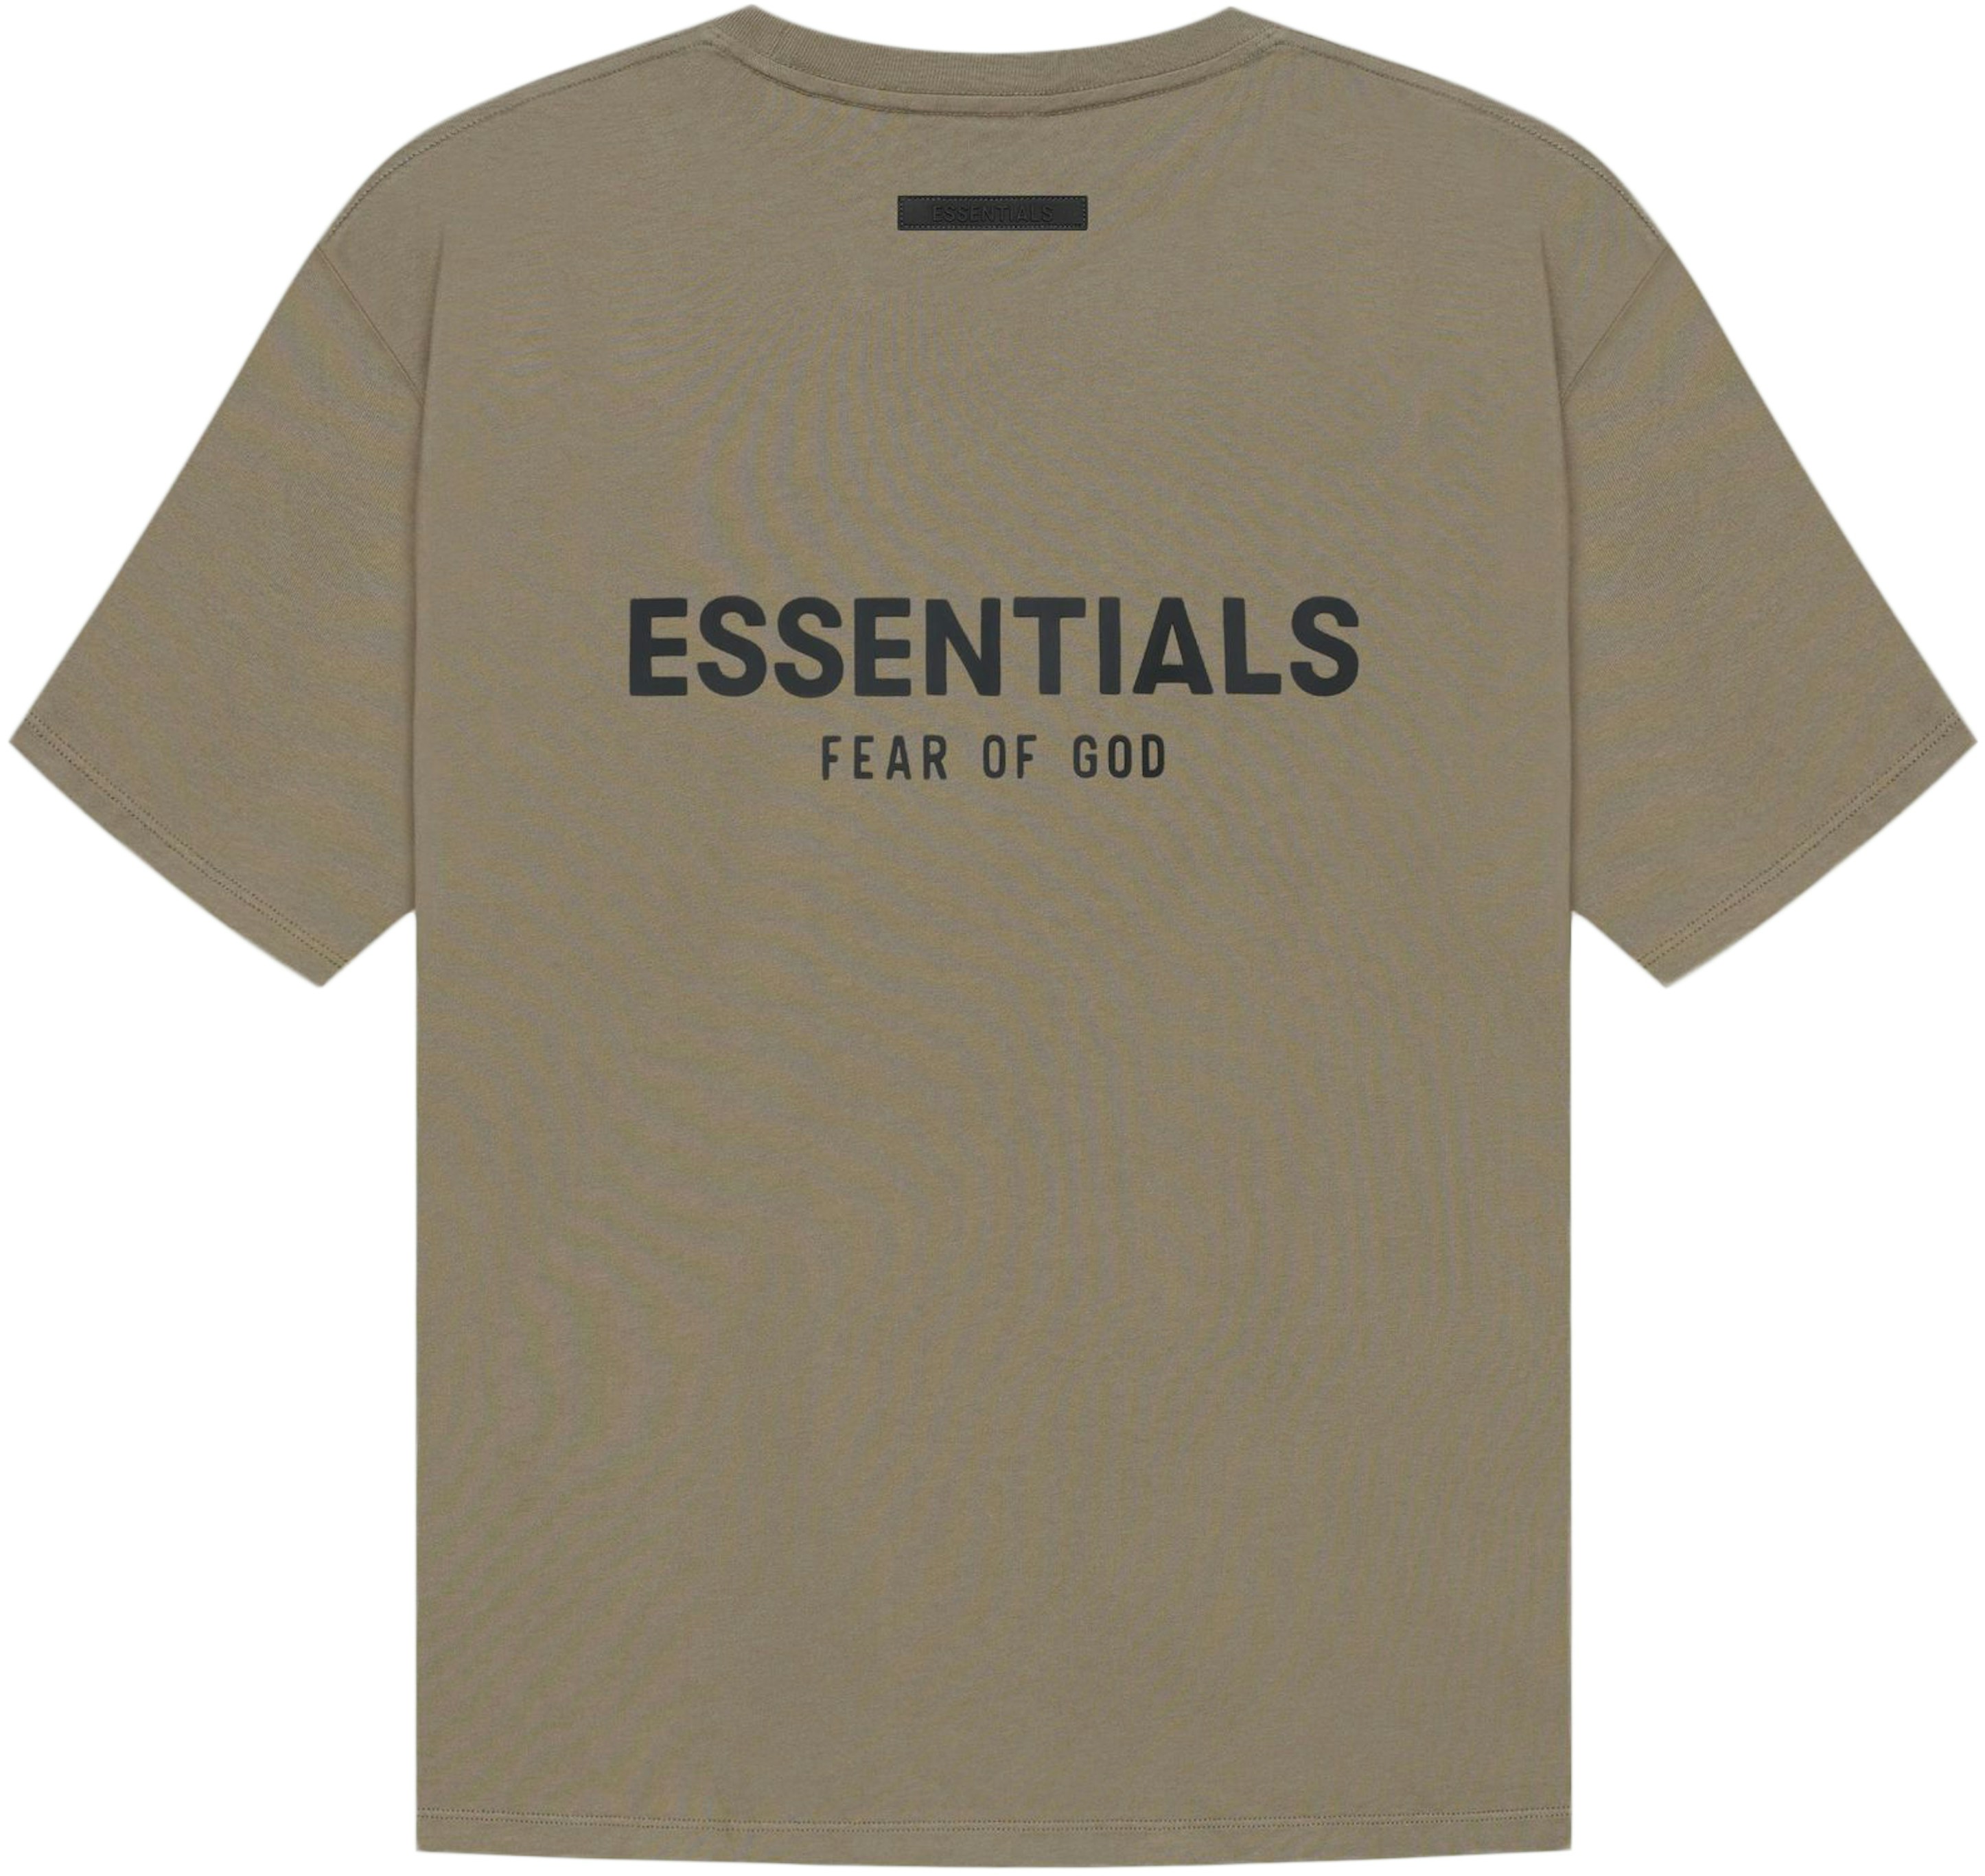 FEAR OF GOD ESSENTIALS Tshirt Taupe SS21